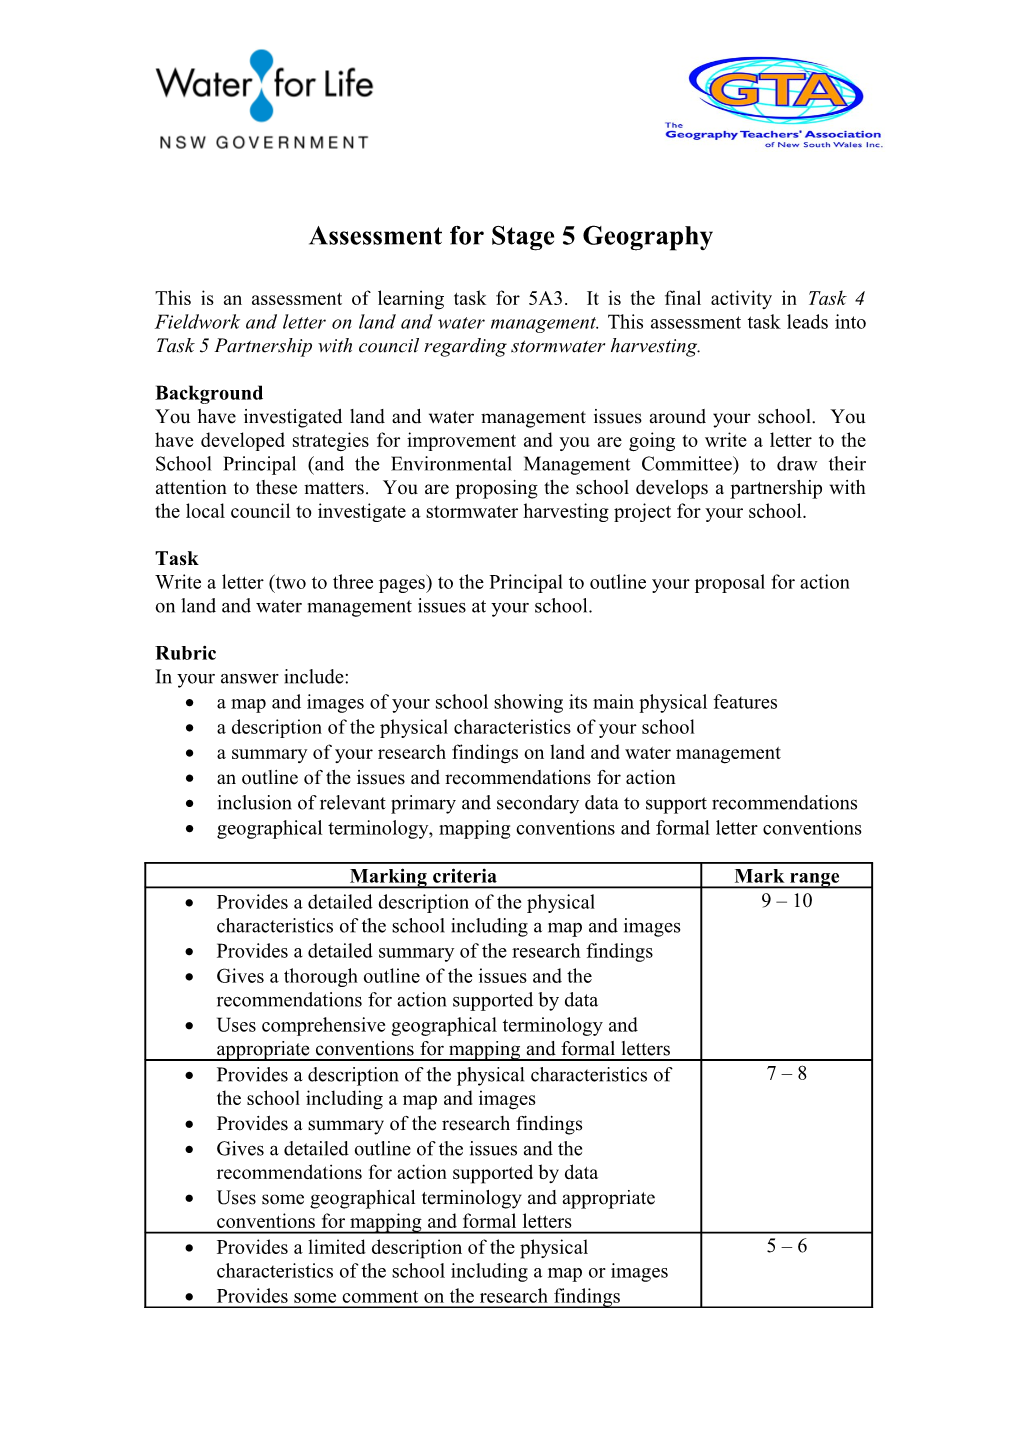 Assessment for Stage 5 Geography